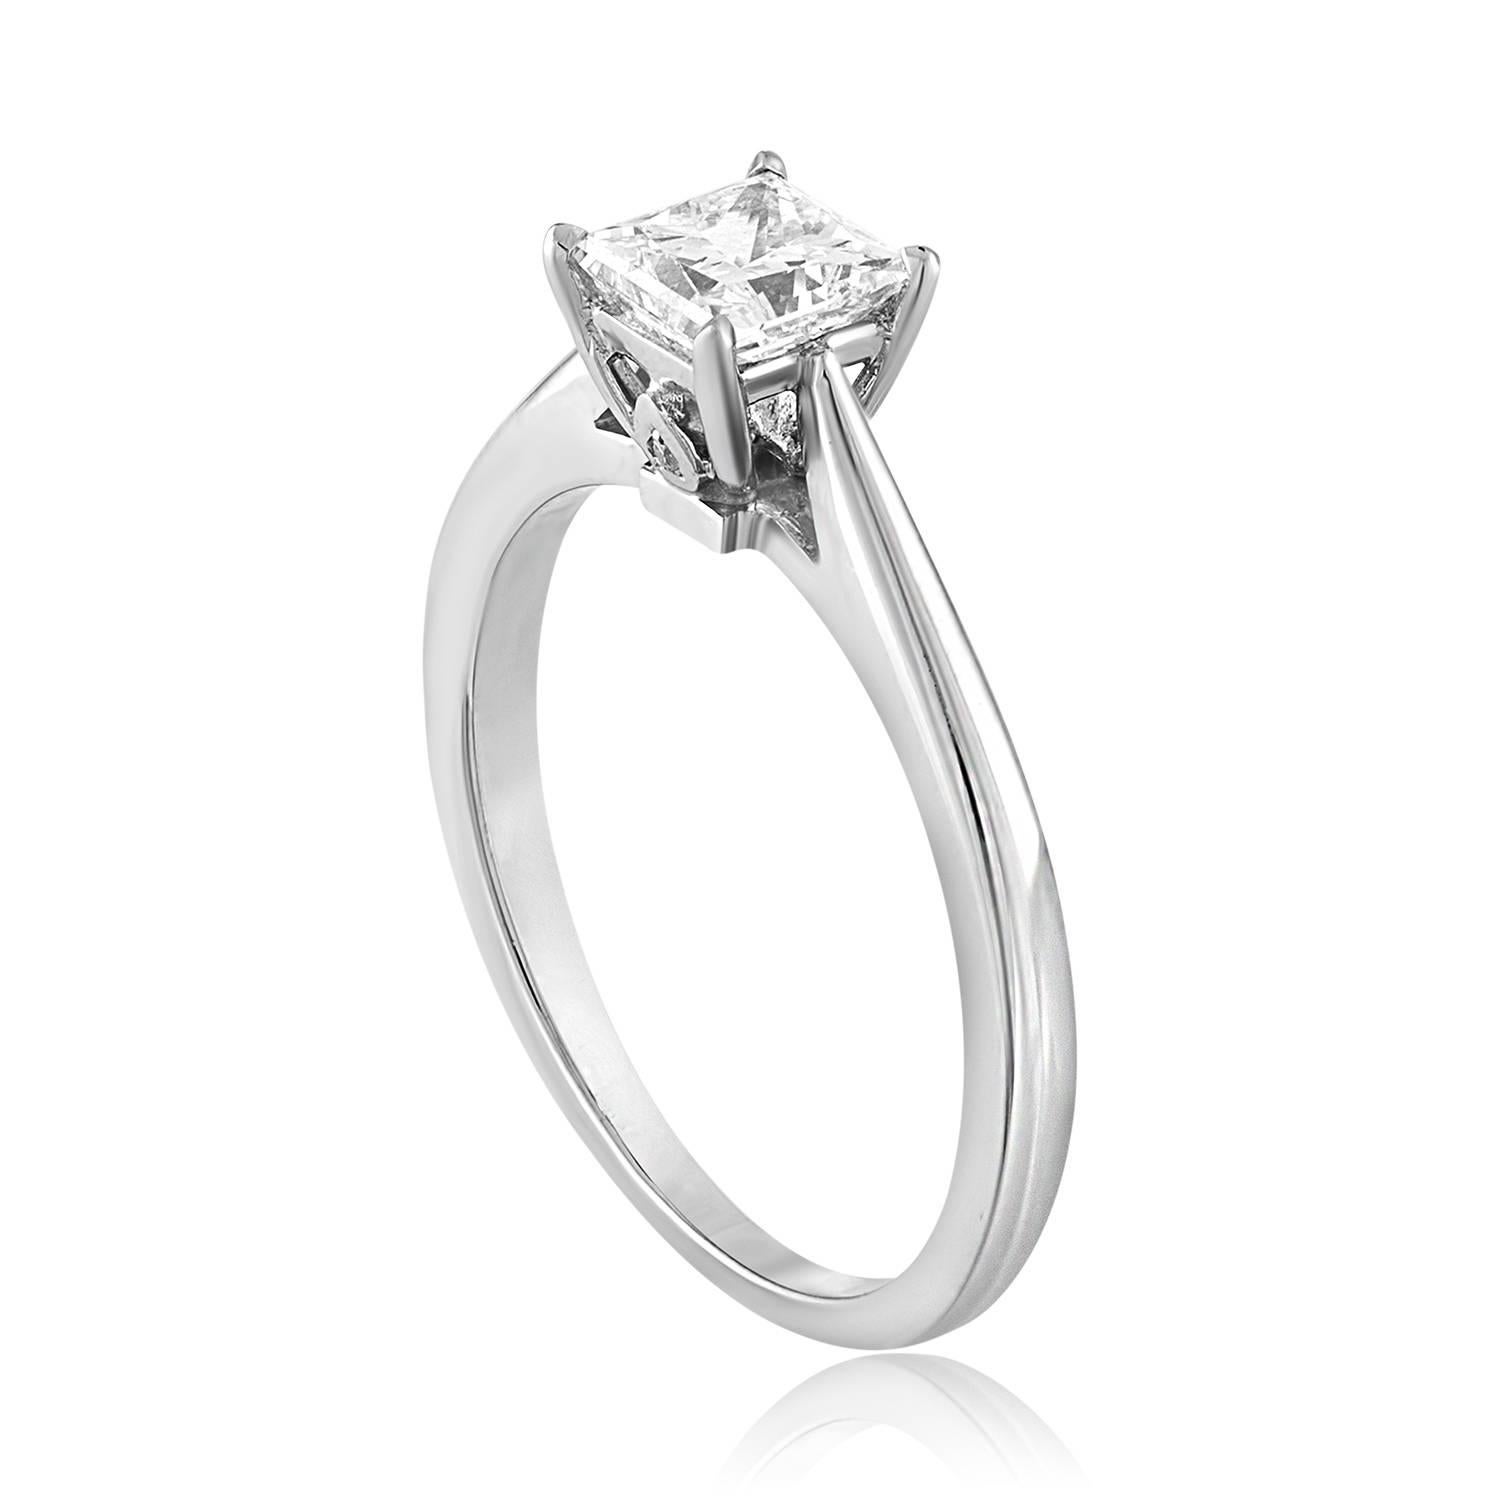 Solitaire Engagement Ring
The ring is 18K White Gold
The center Is Princess Cut Stone, GIA Certified 0.73Ct E VS2
There are 0.01 Ct in small diamonds F VS
The ring is a size 5.75, sizable.
The ring weighs 2.8 grams